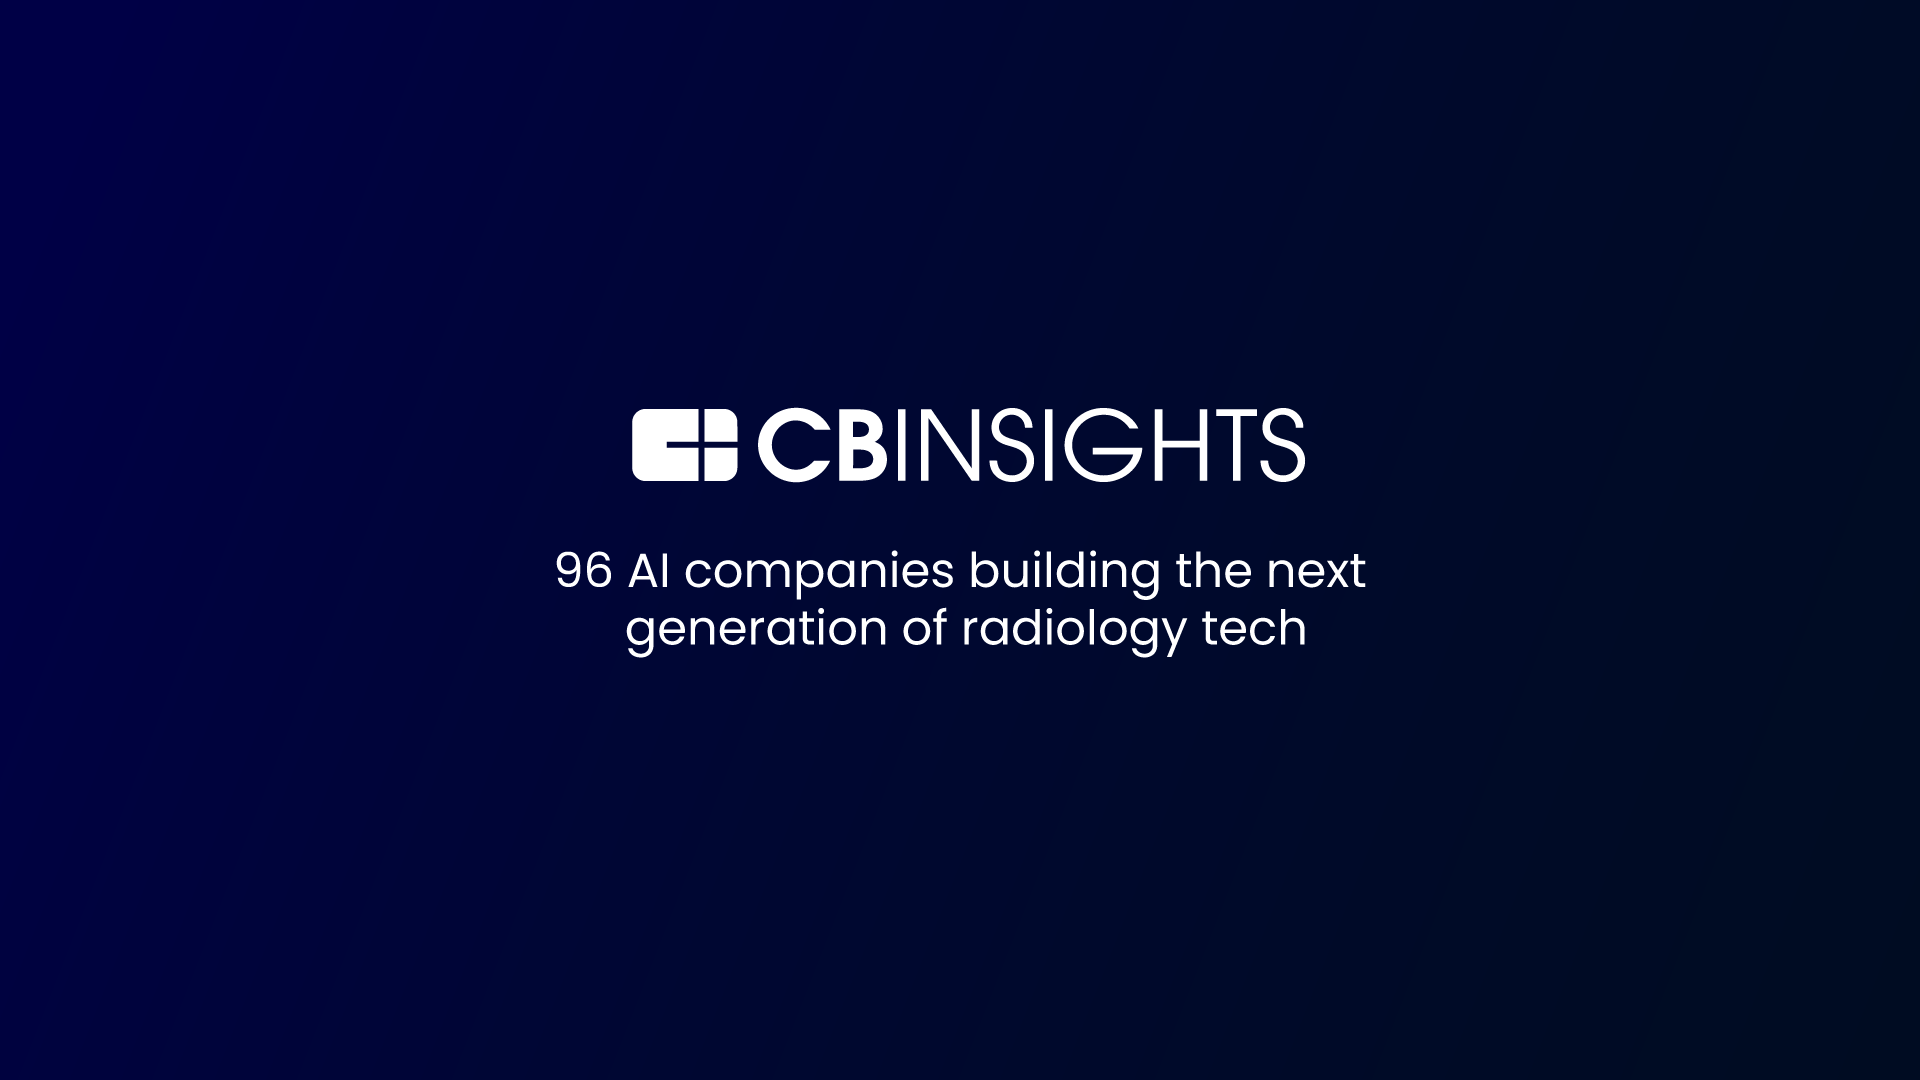 96 AI companies building the next generation of radiology tech